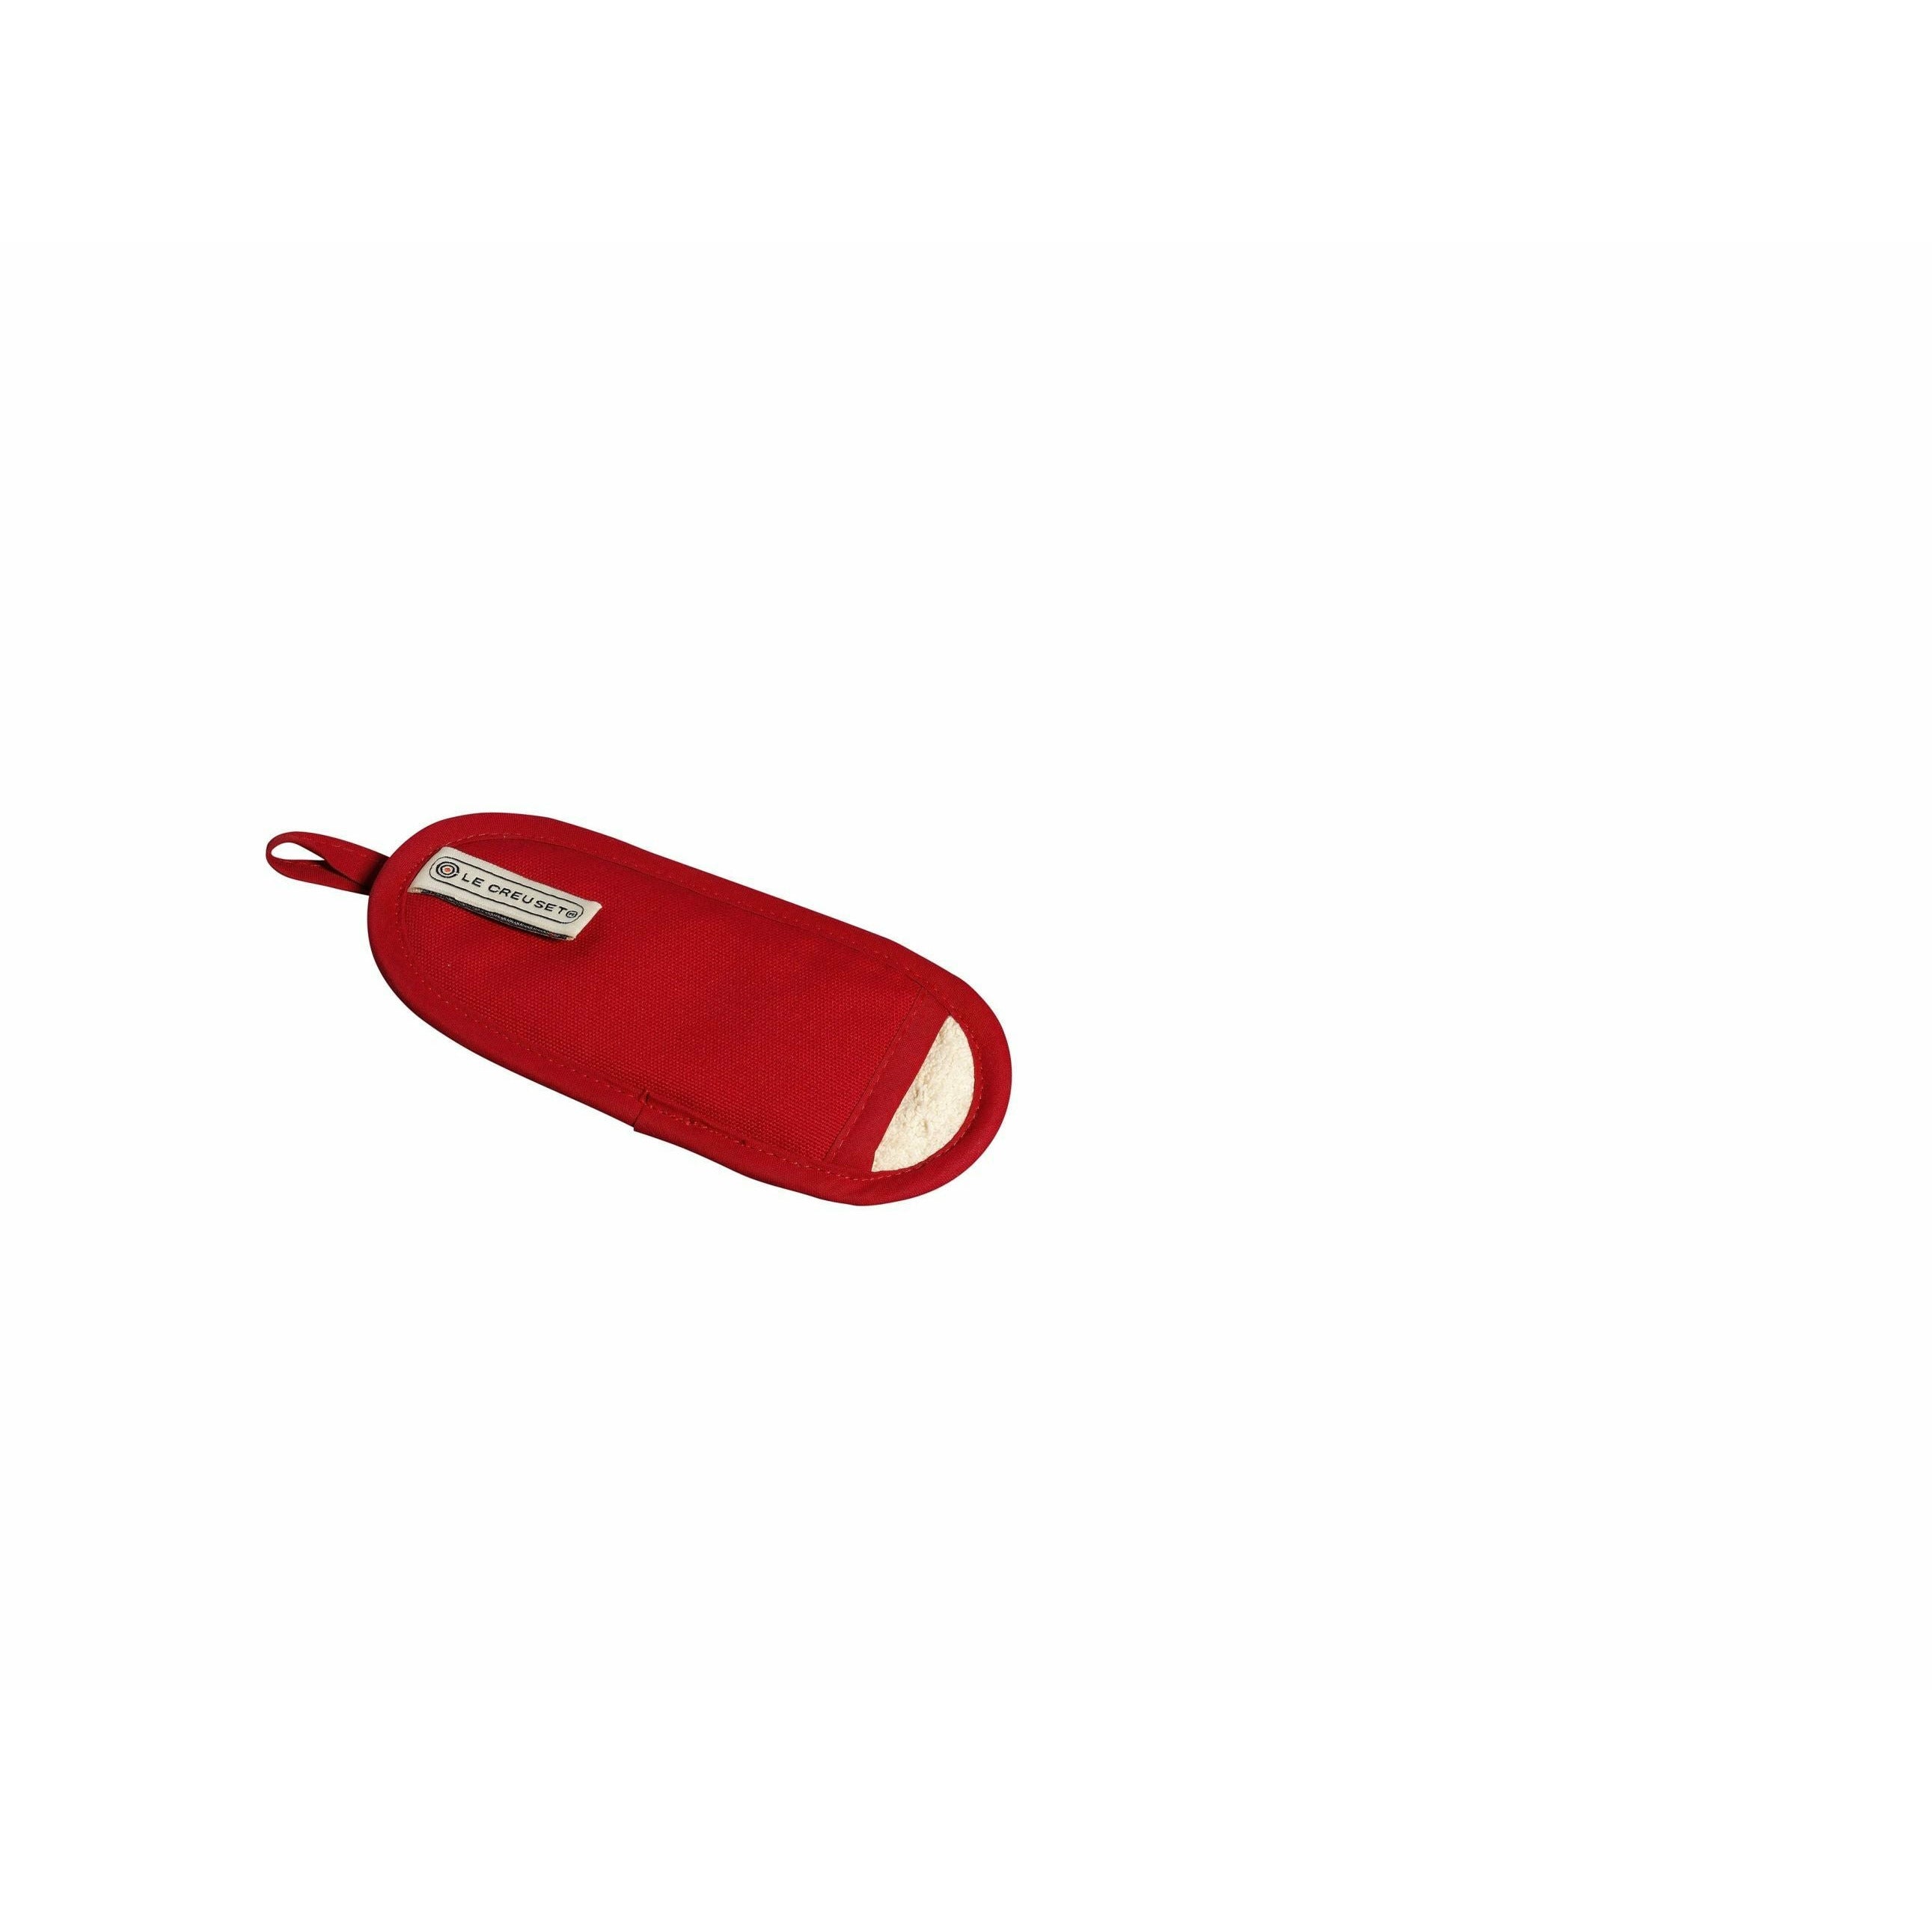 Le Creuset Many Tuber 18 x 8 cm, Cherry Red